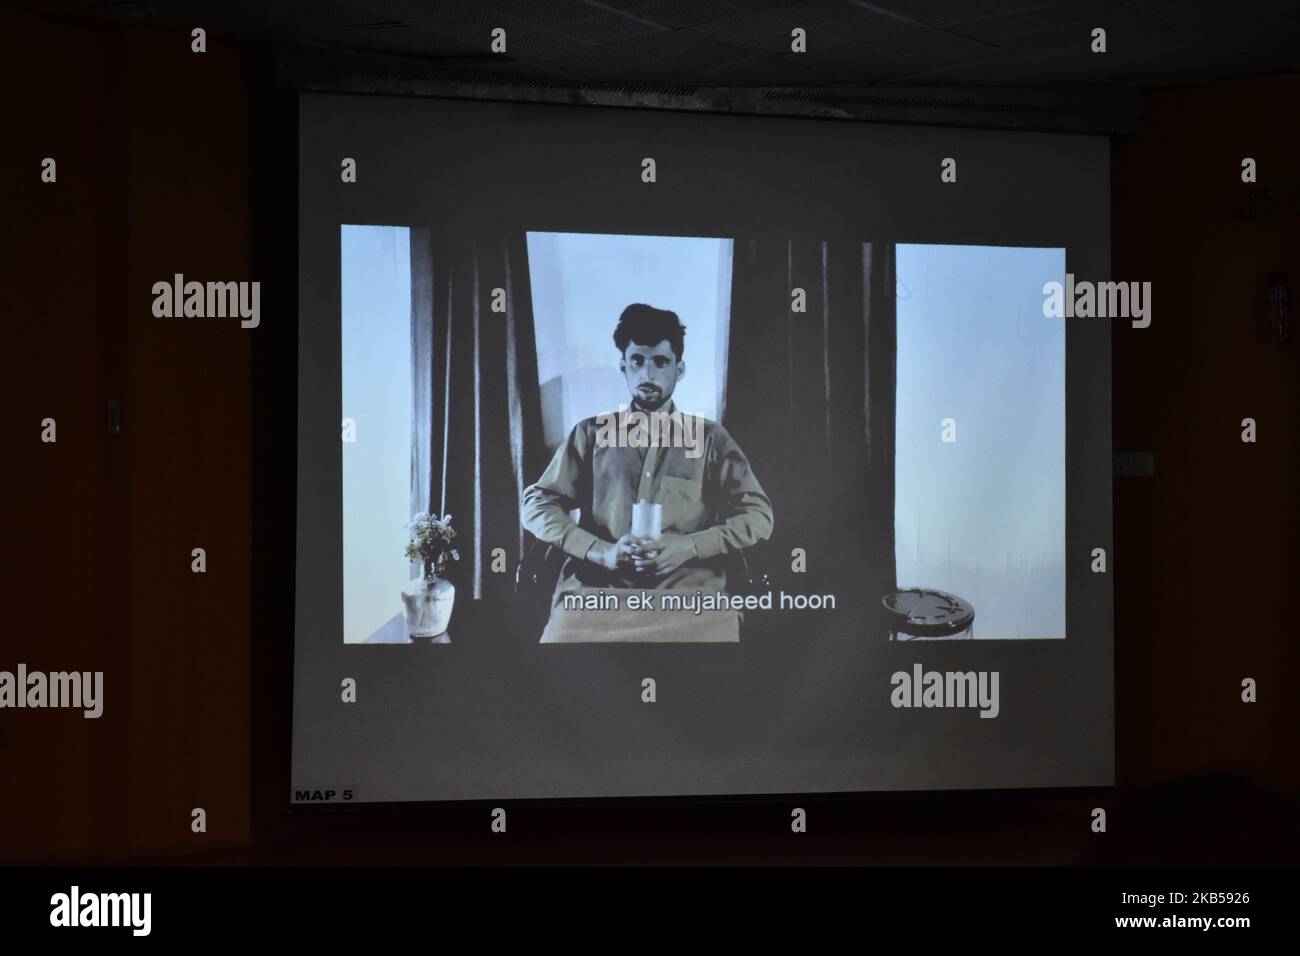 A confessional video of a Lashkar-e-Taiba rebel being played during a press conference by the Indian army and the police in Srinagar on 4 September 2019. Indian Army claimed to have arrested two 'Pakistan Based' rebels after they had infiltrated into valley. (Photo by Muzamil Mattoo/NurPhoto) Stock Photo